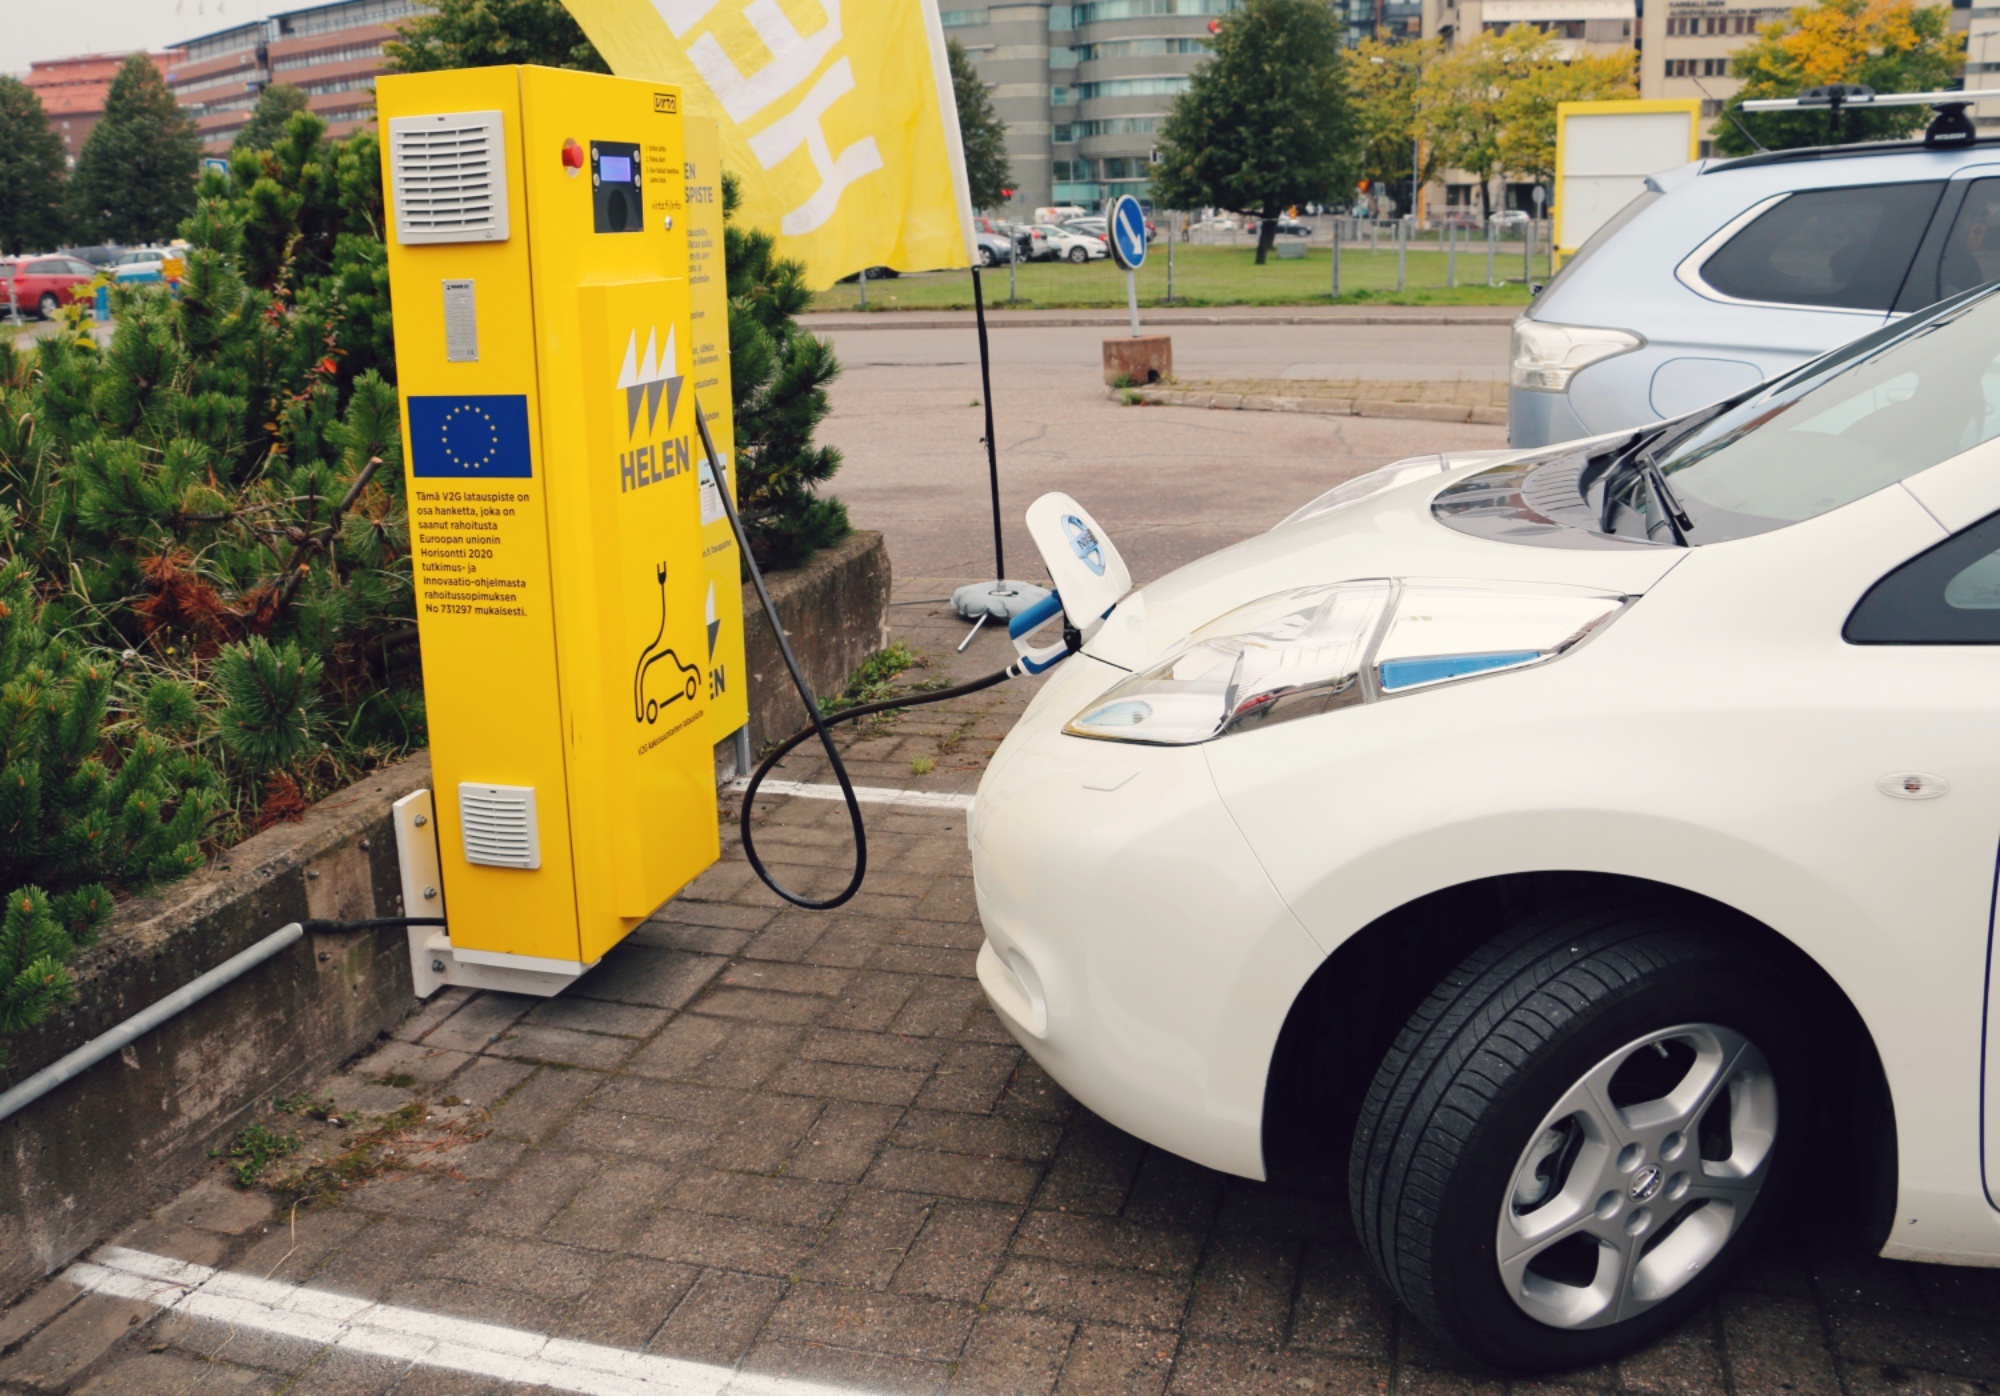 Public bidirectional EV charging point installed to Finland